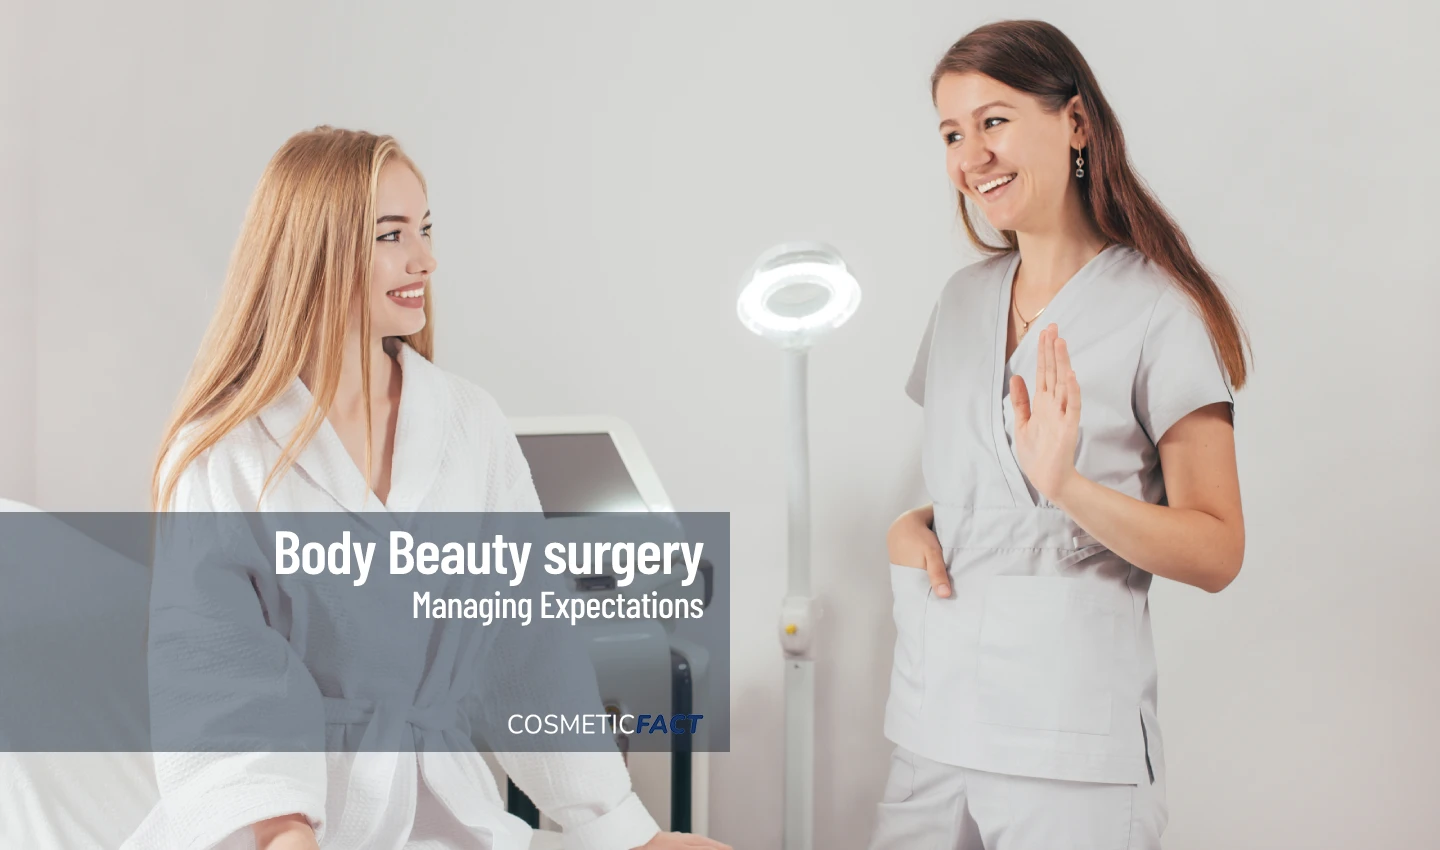 A patient sits across from her doctor, engaged in a conversation about body beauty surgery.